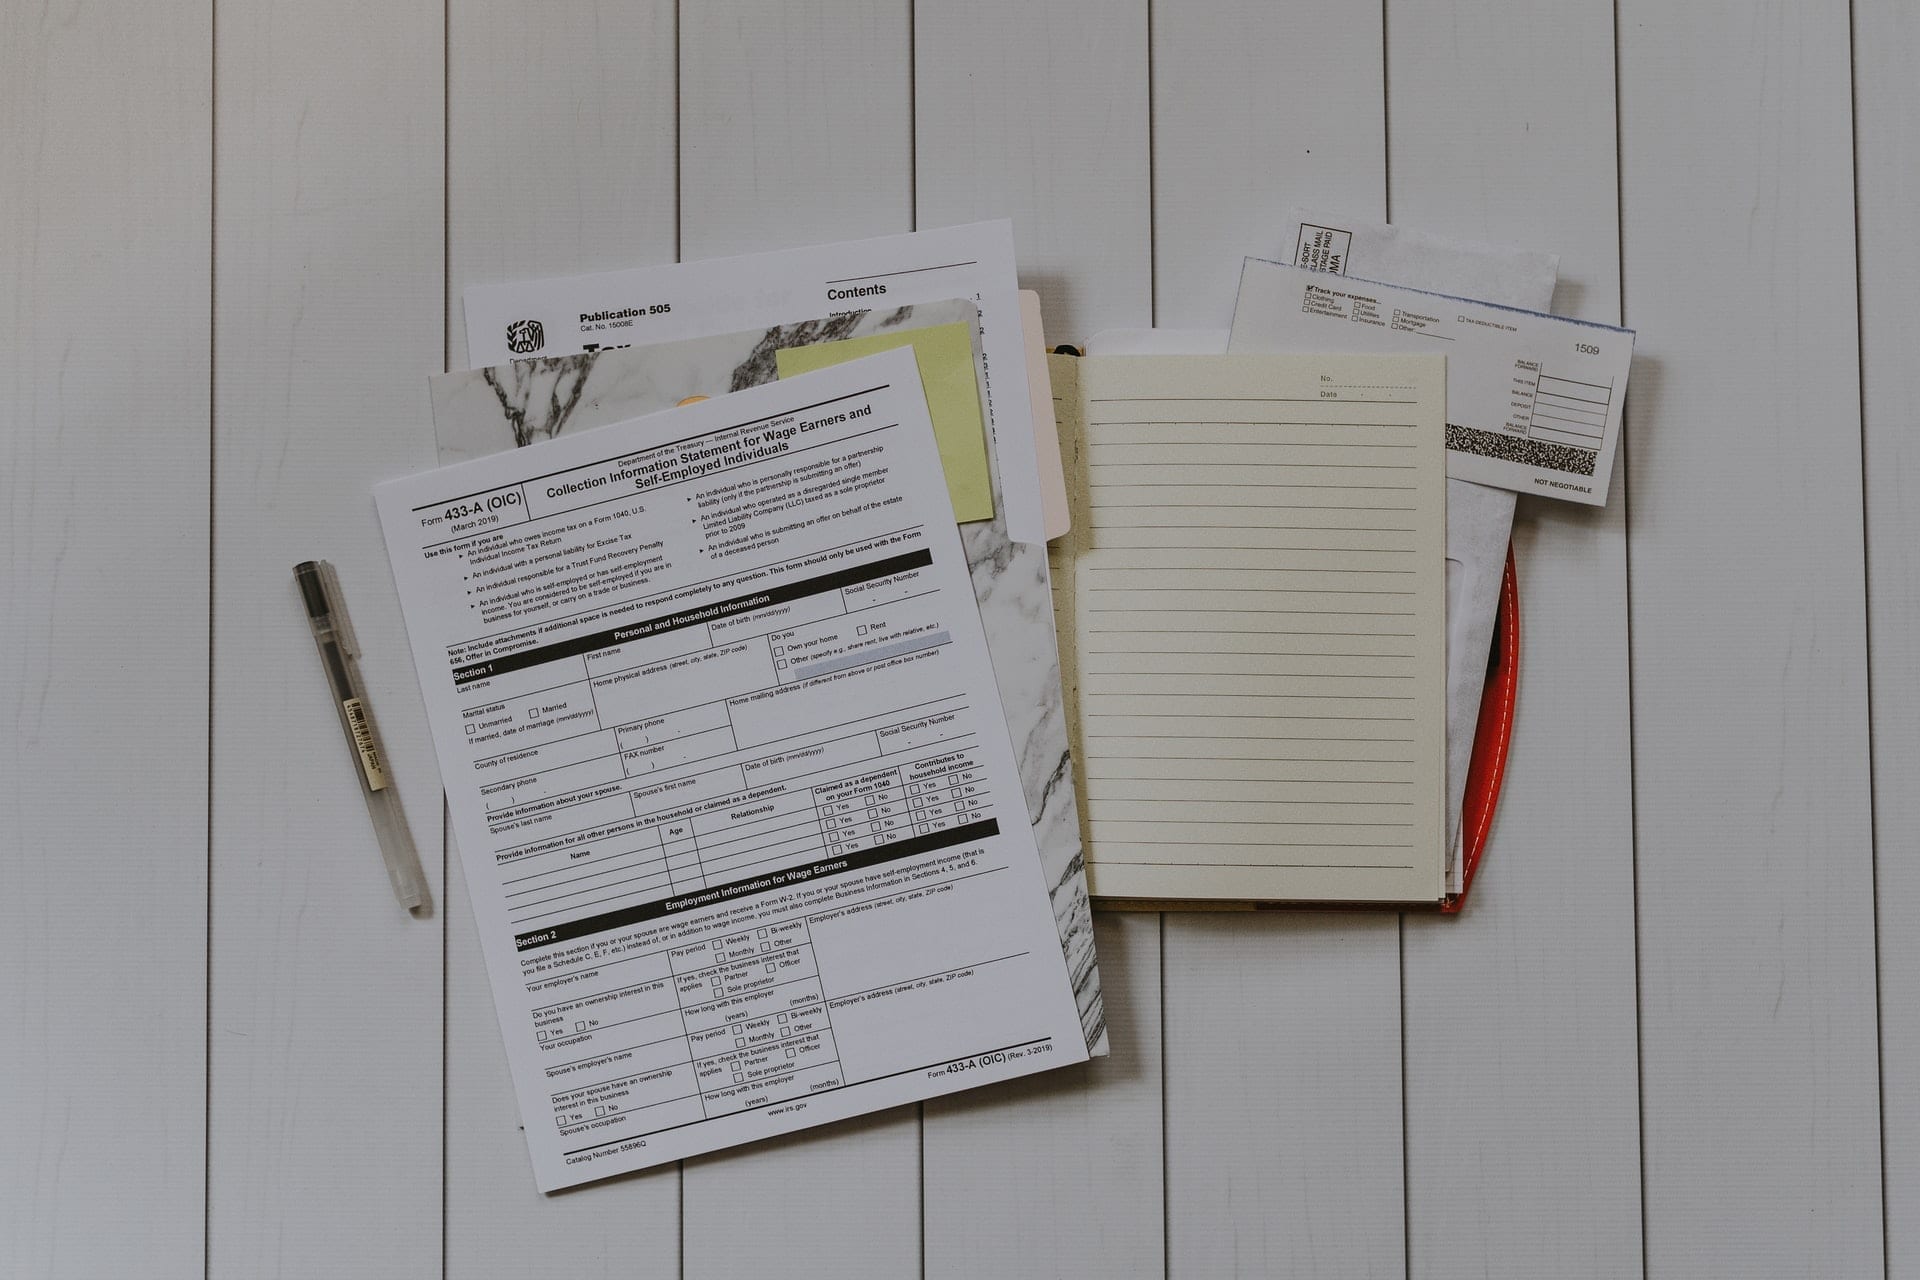 There are some things you need to be aware of when filing taxes while incarcerated.